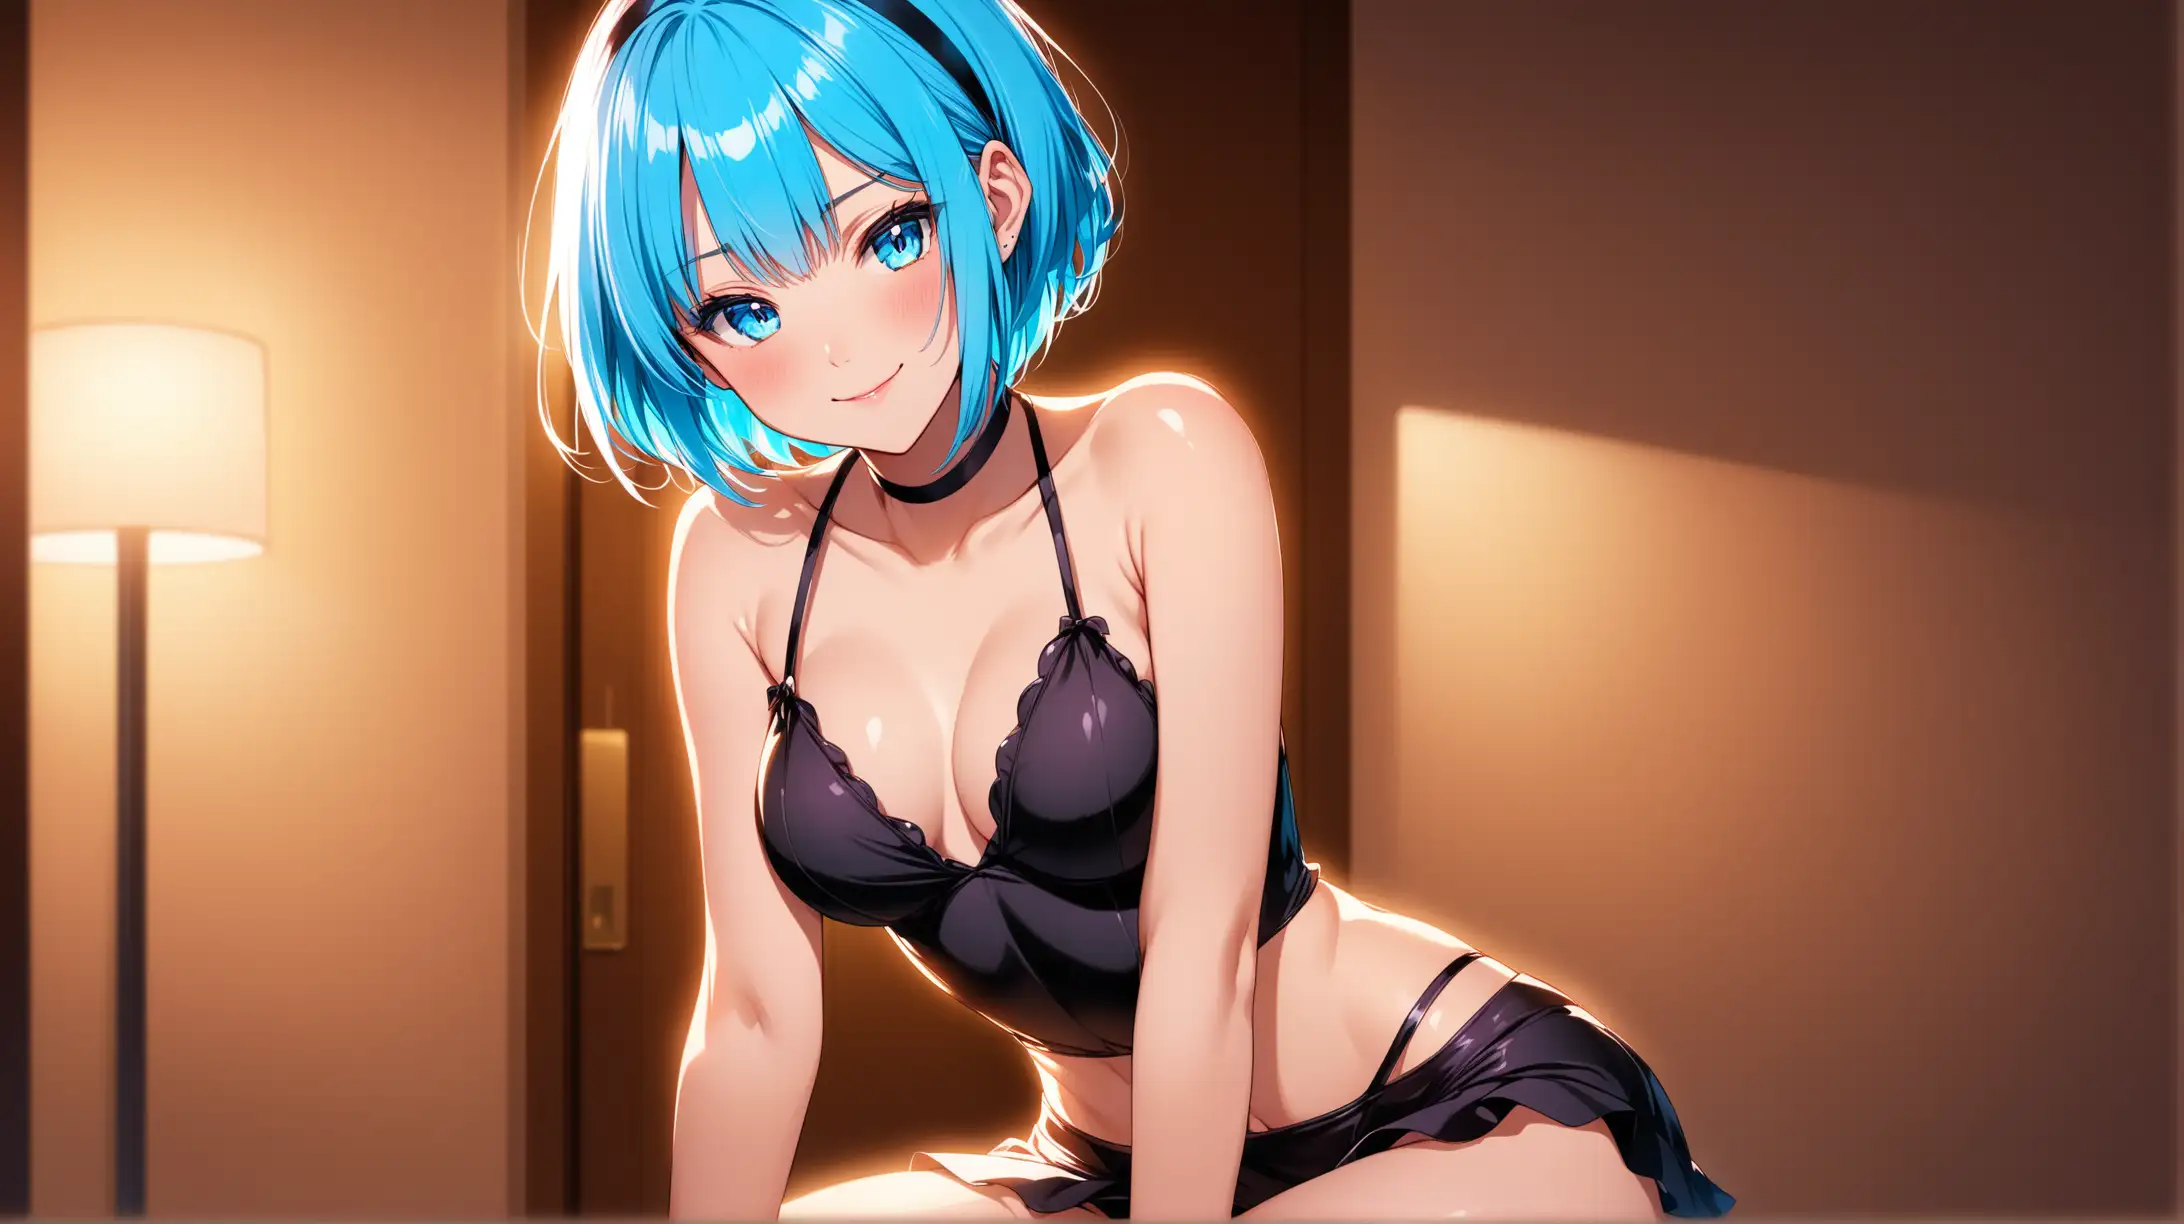 Draw the character Rem, high quality, indoors, ambient lighting, long shot, in a seductive pose, wearing colorful fashion clothing, smiling at the viewer